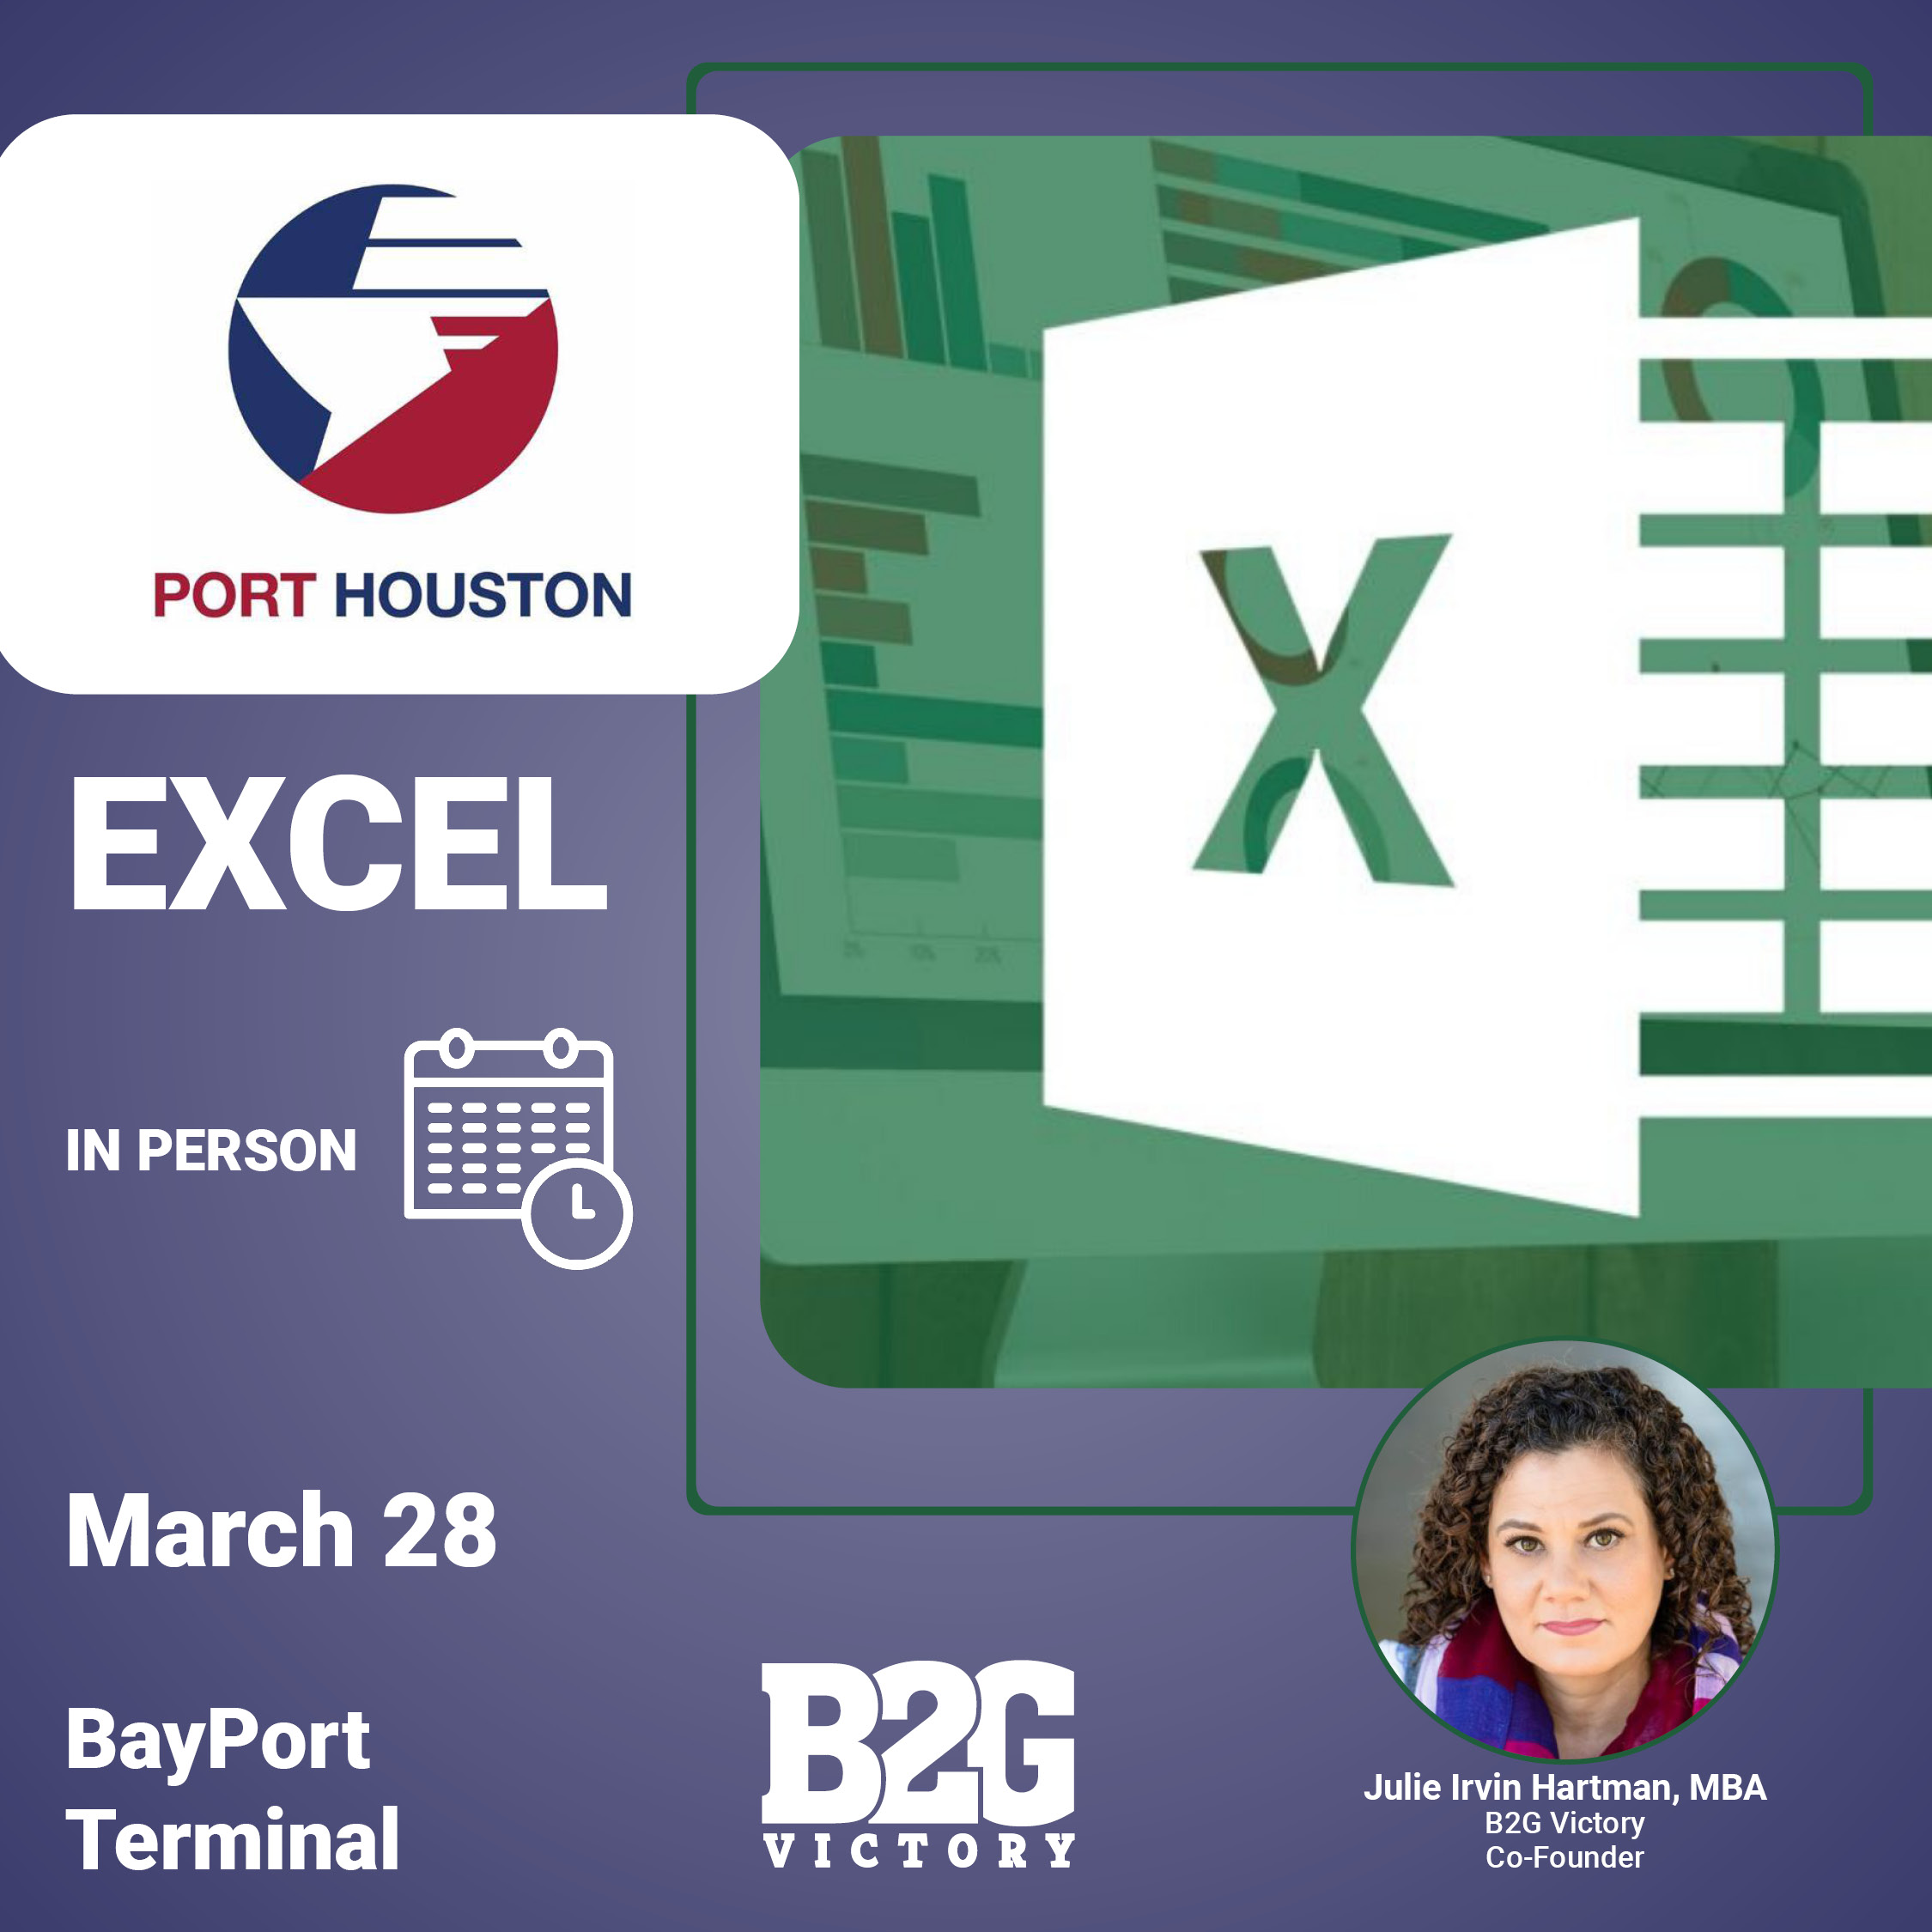 Port Houston Excel Training March 28